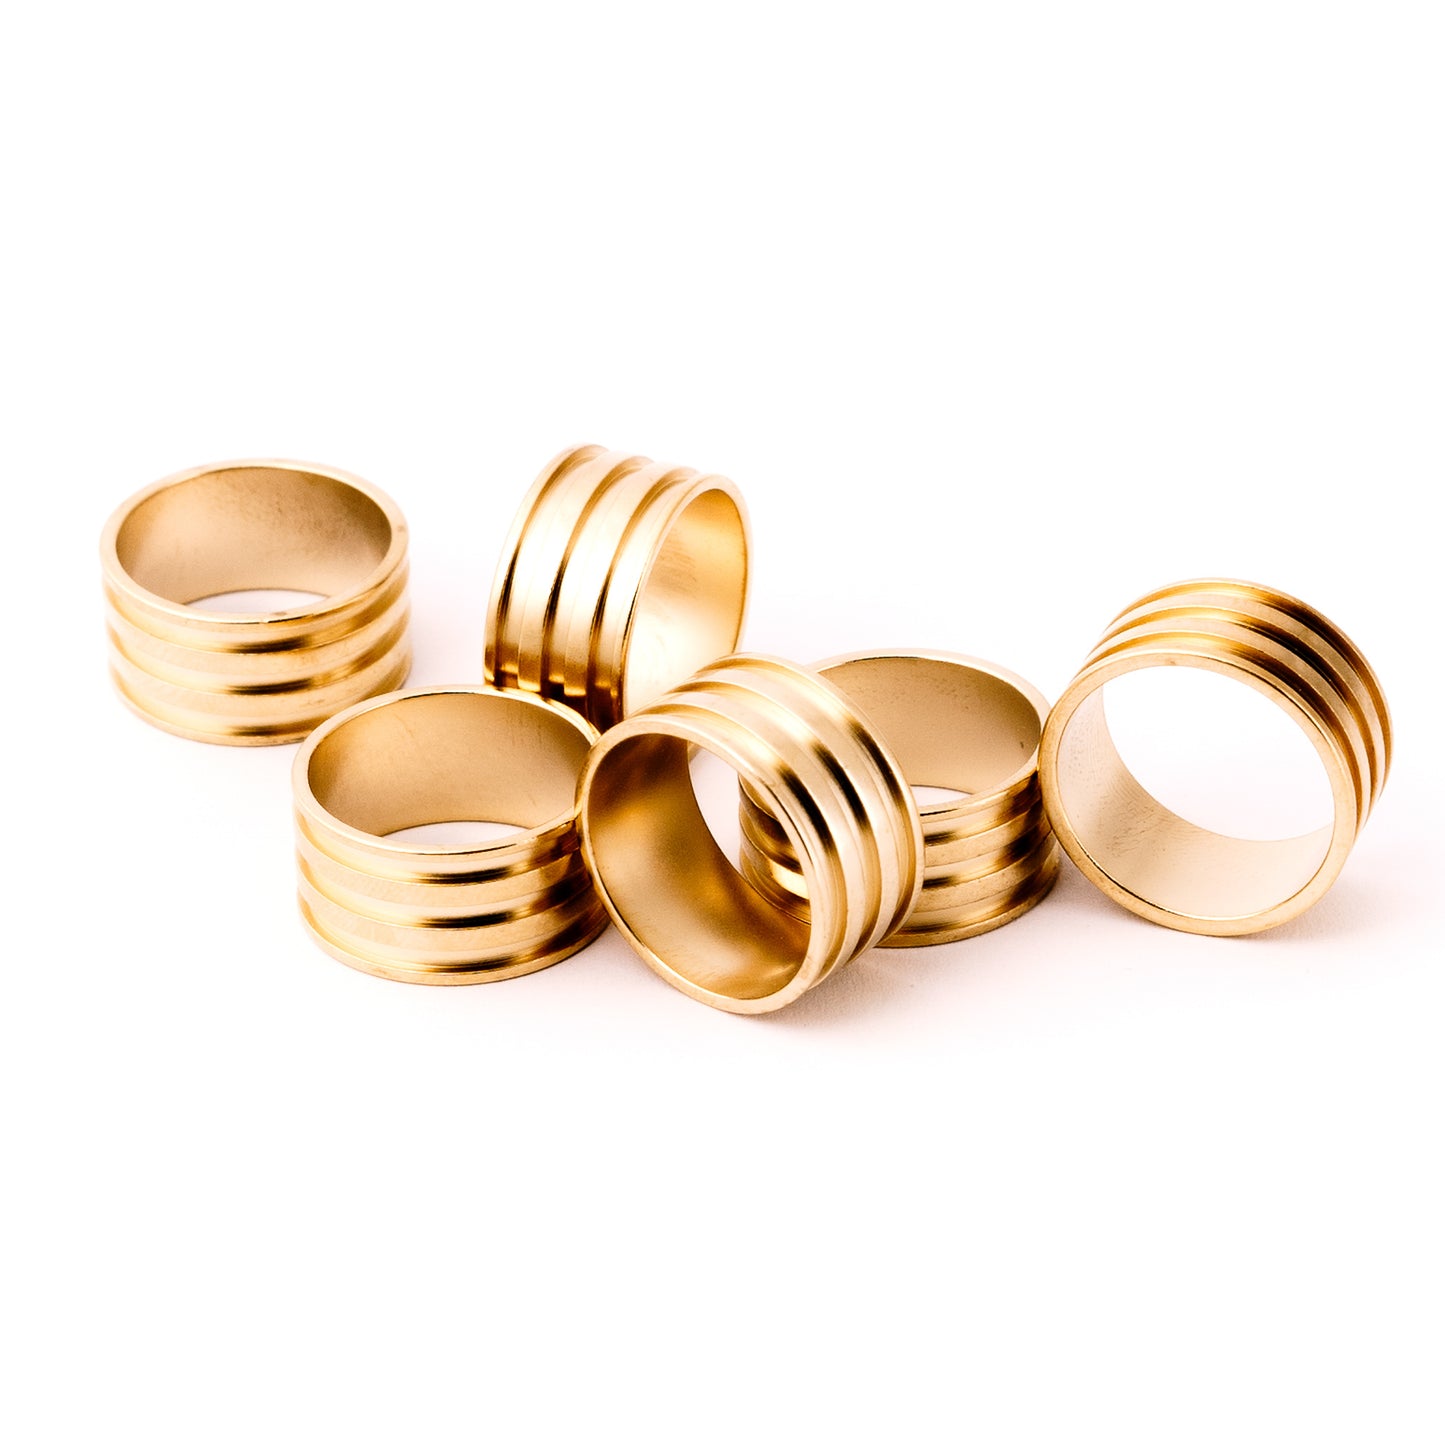 gold channel band rings in group